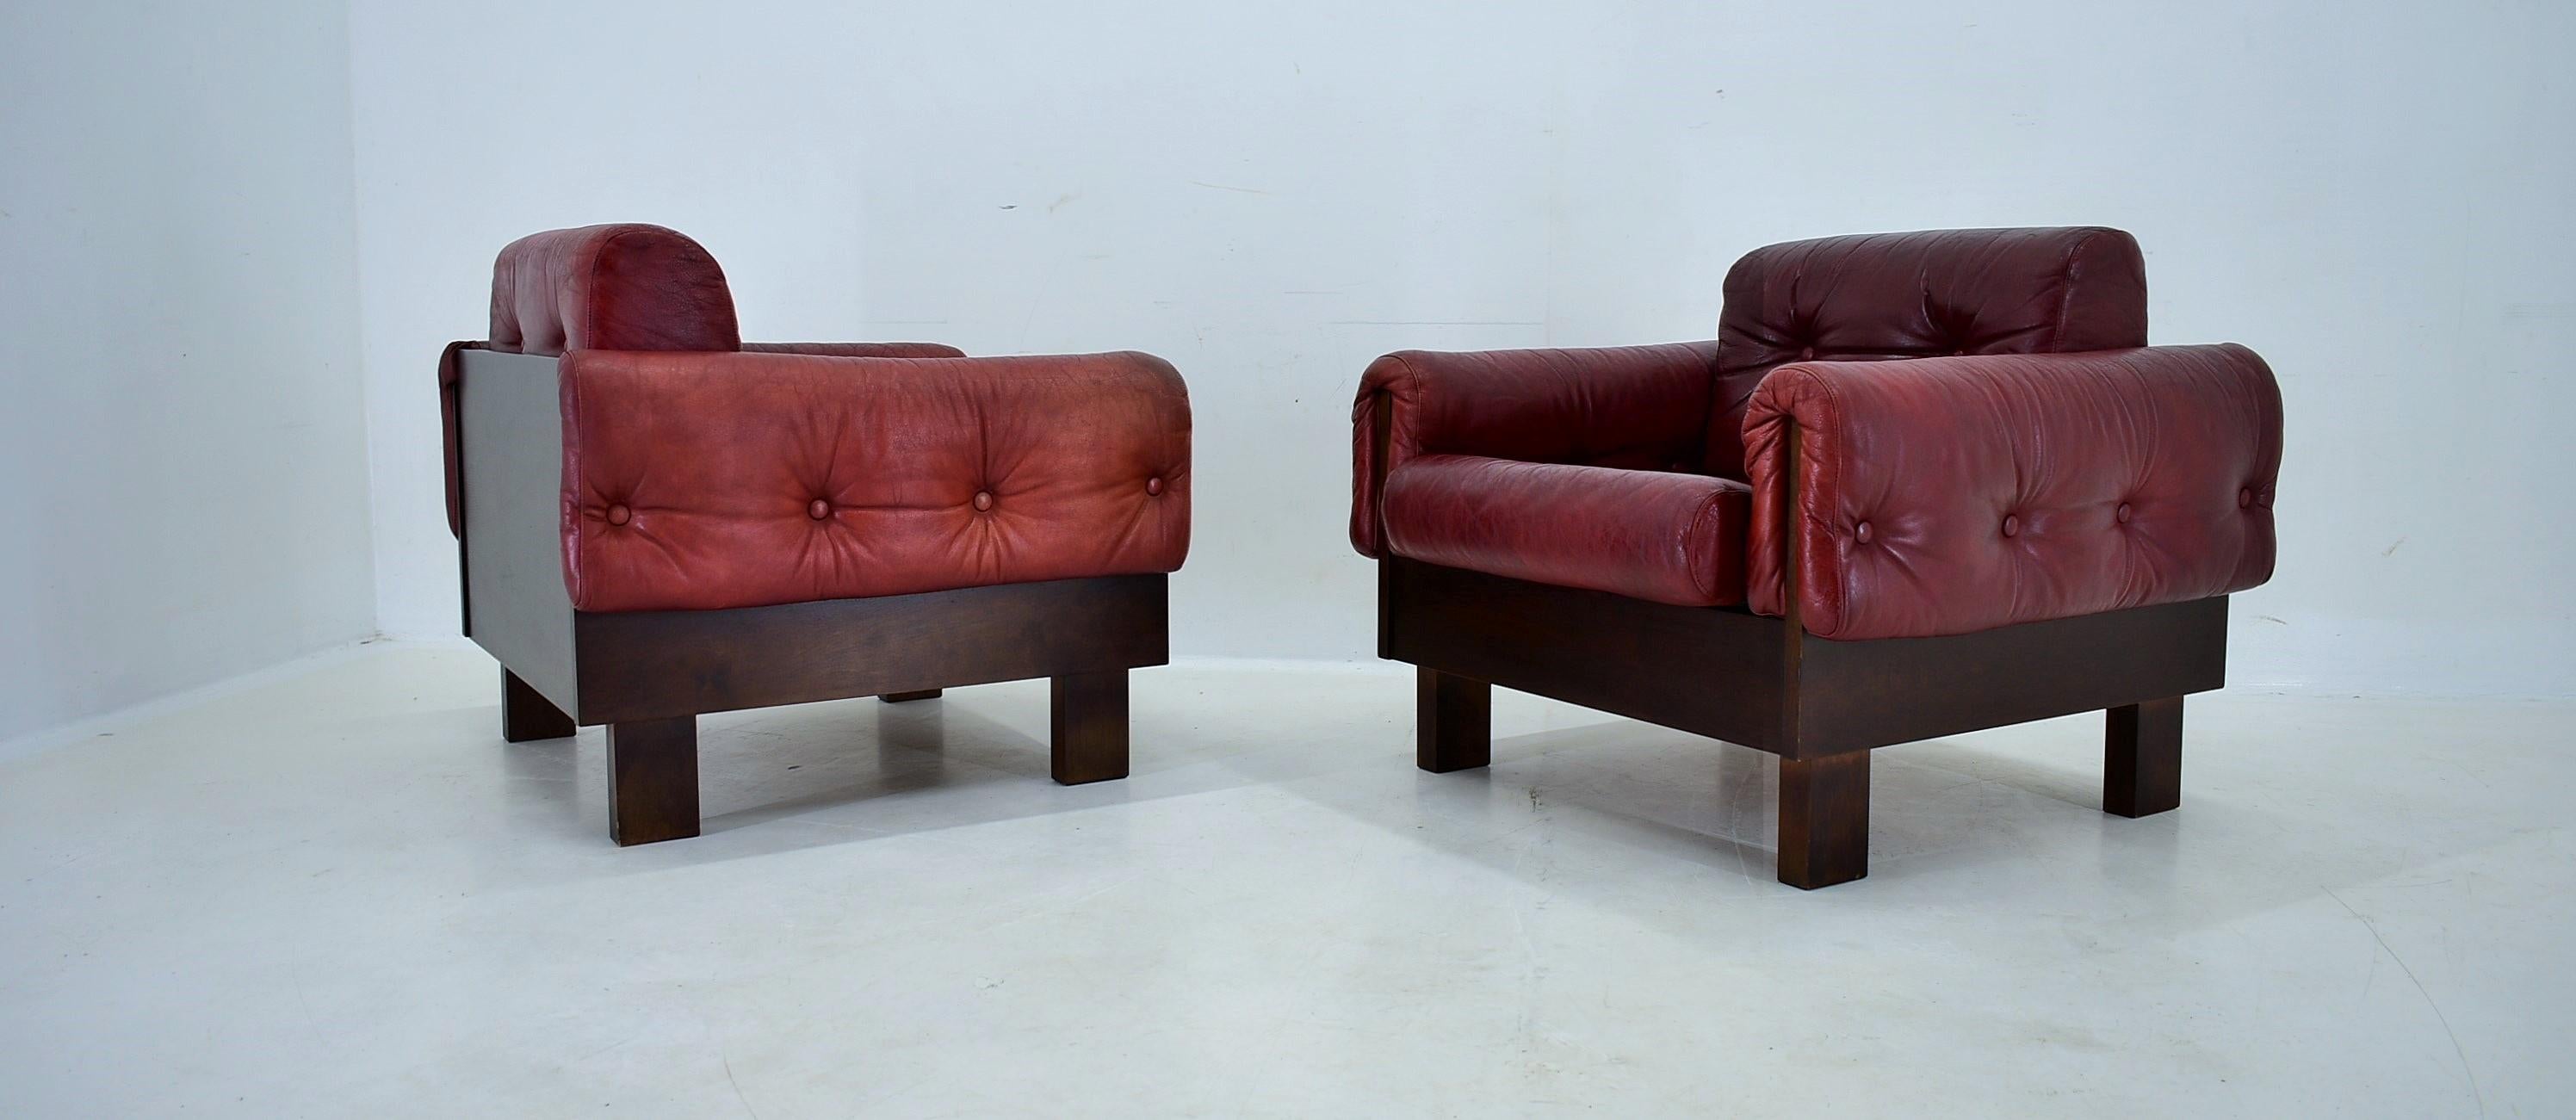 Pair of vintage leather armchairs , Czechoslovakia 1970s For Sale 13